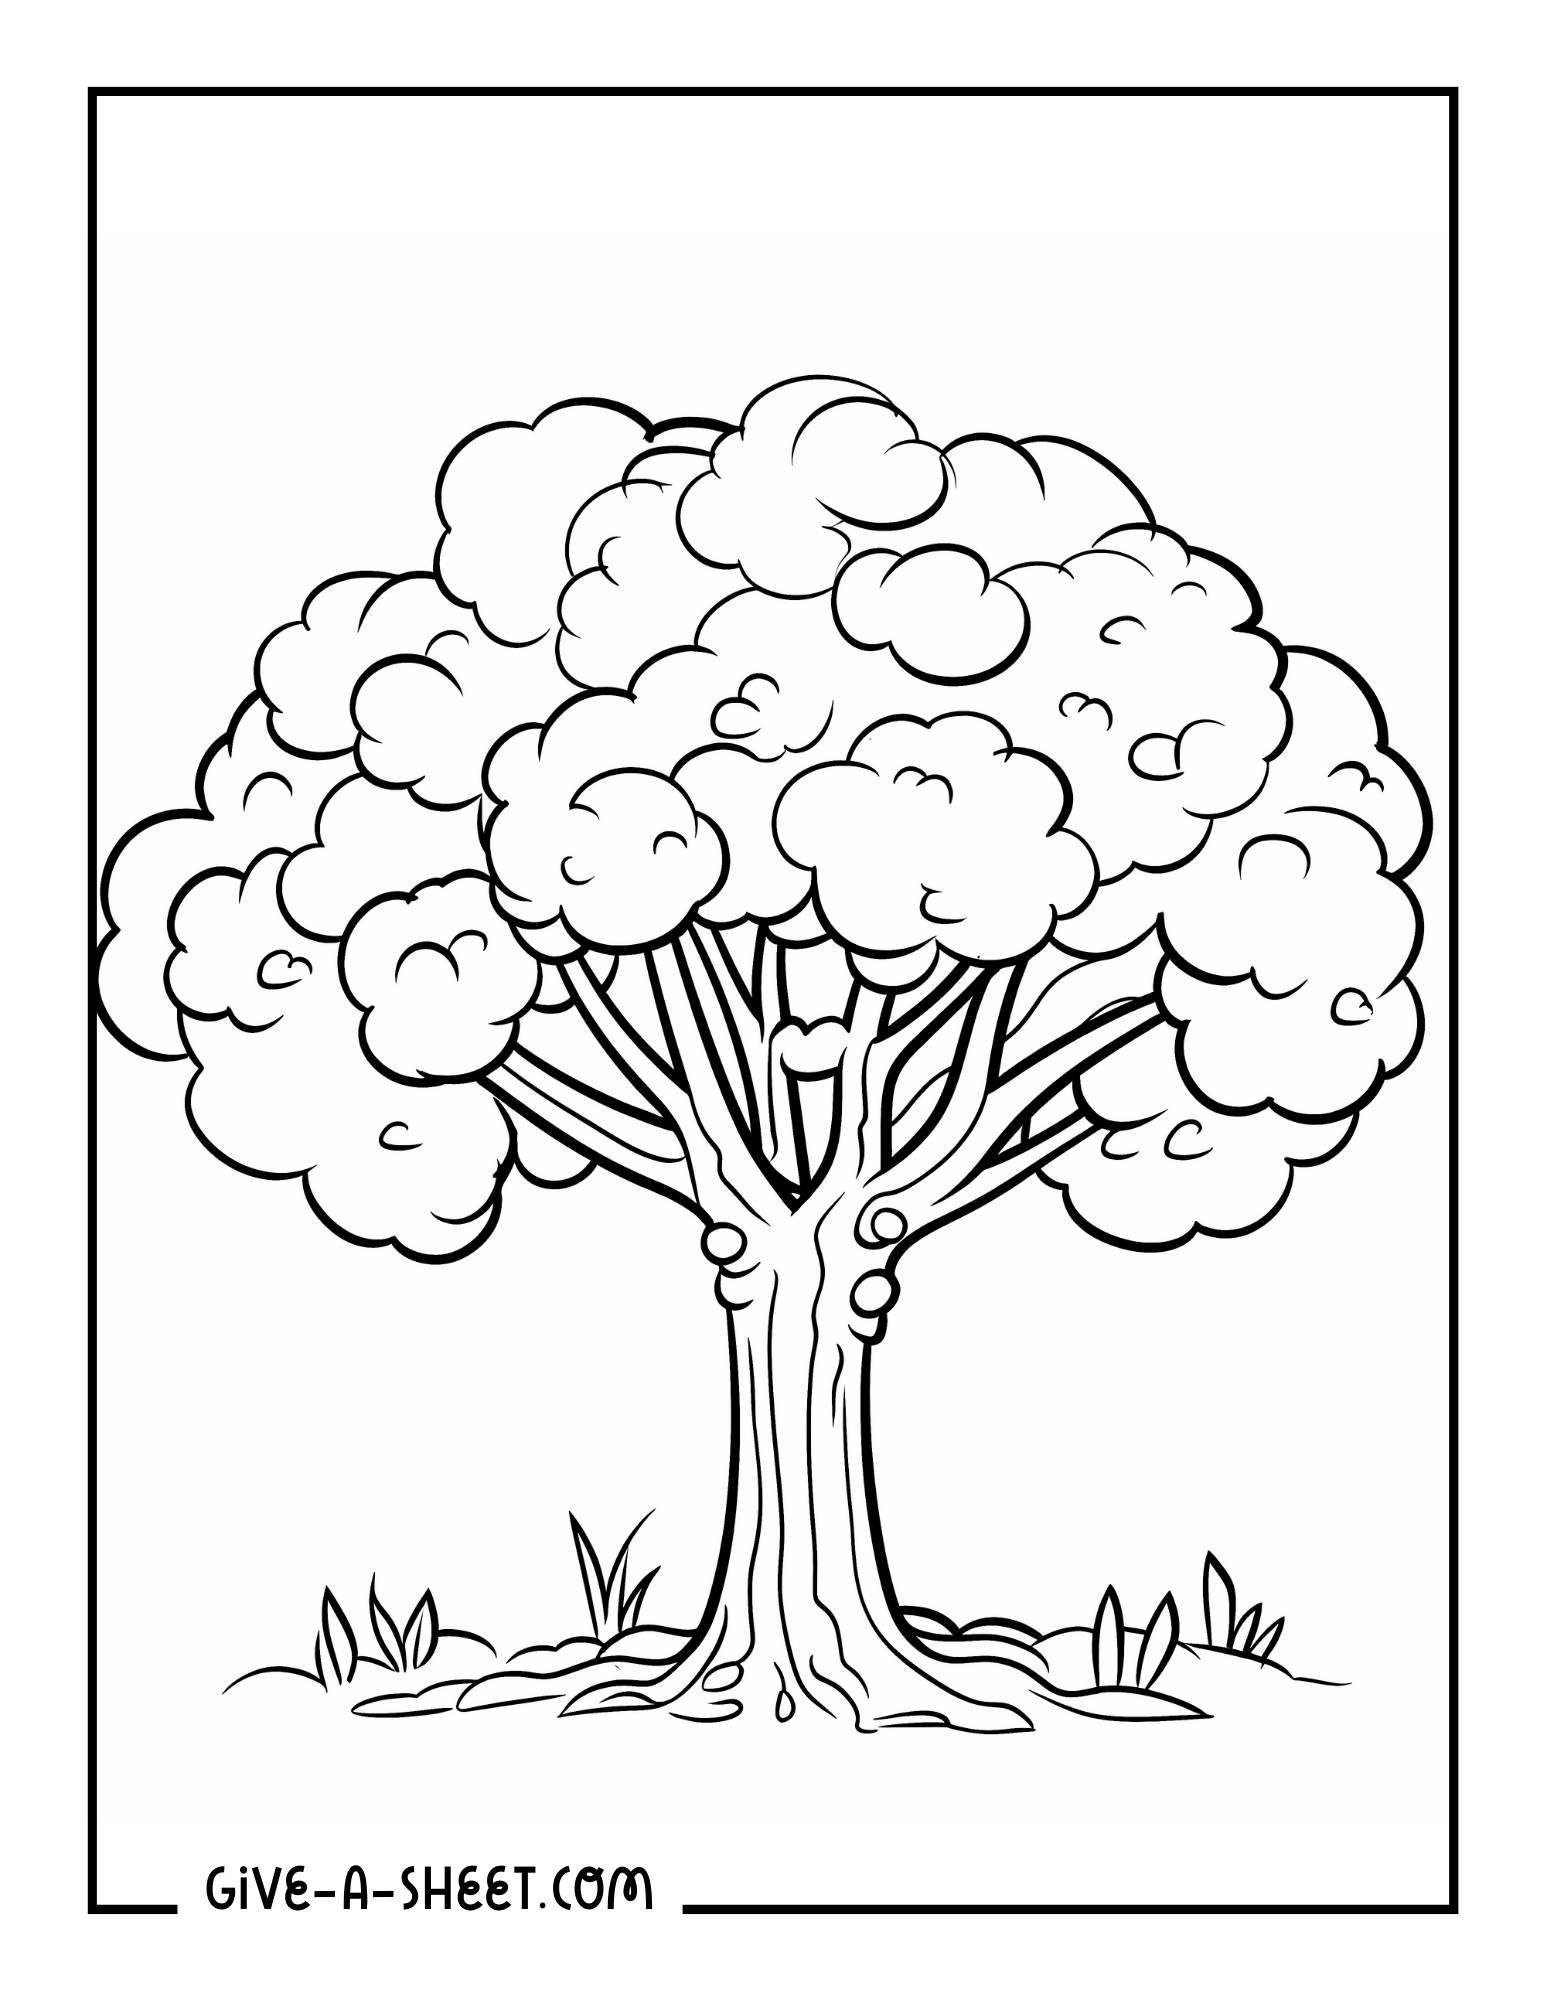 Beautiful tree pictures to color in.